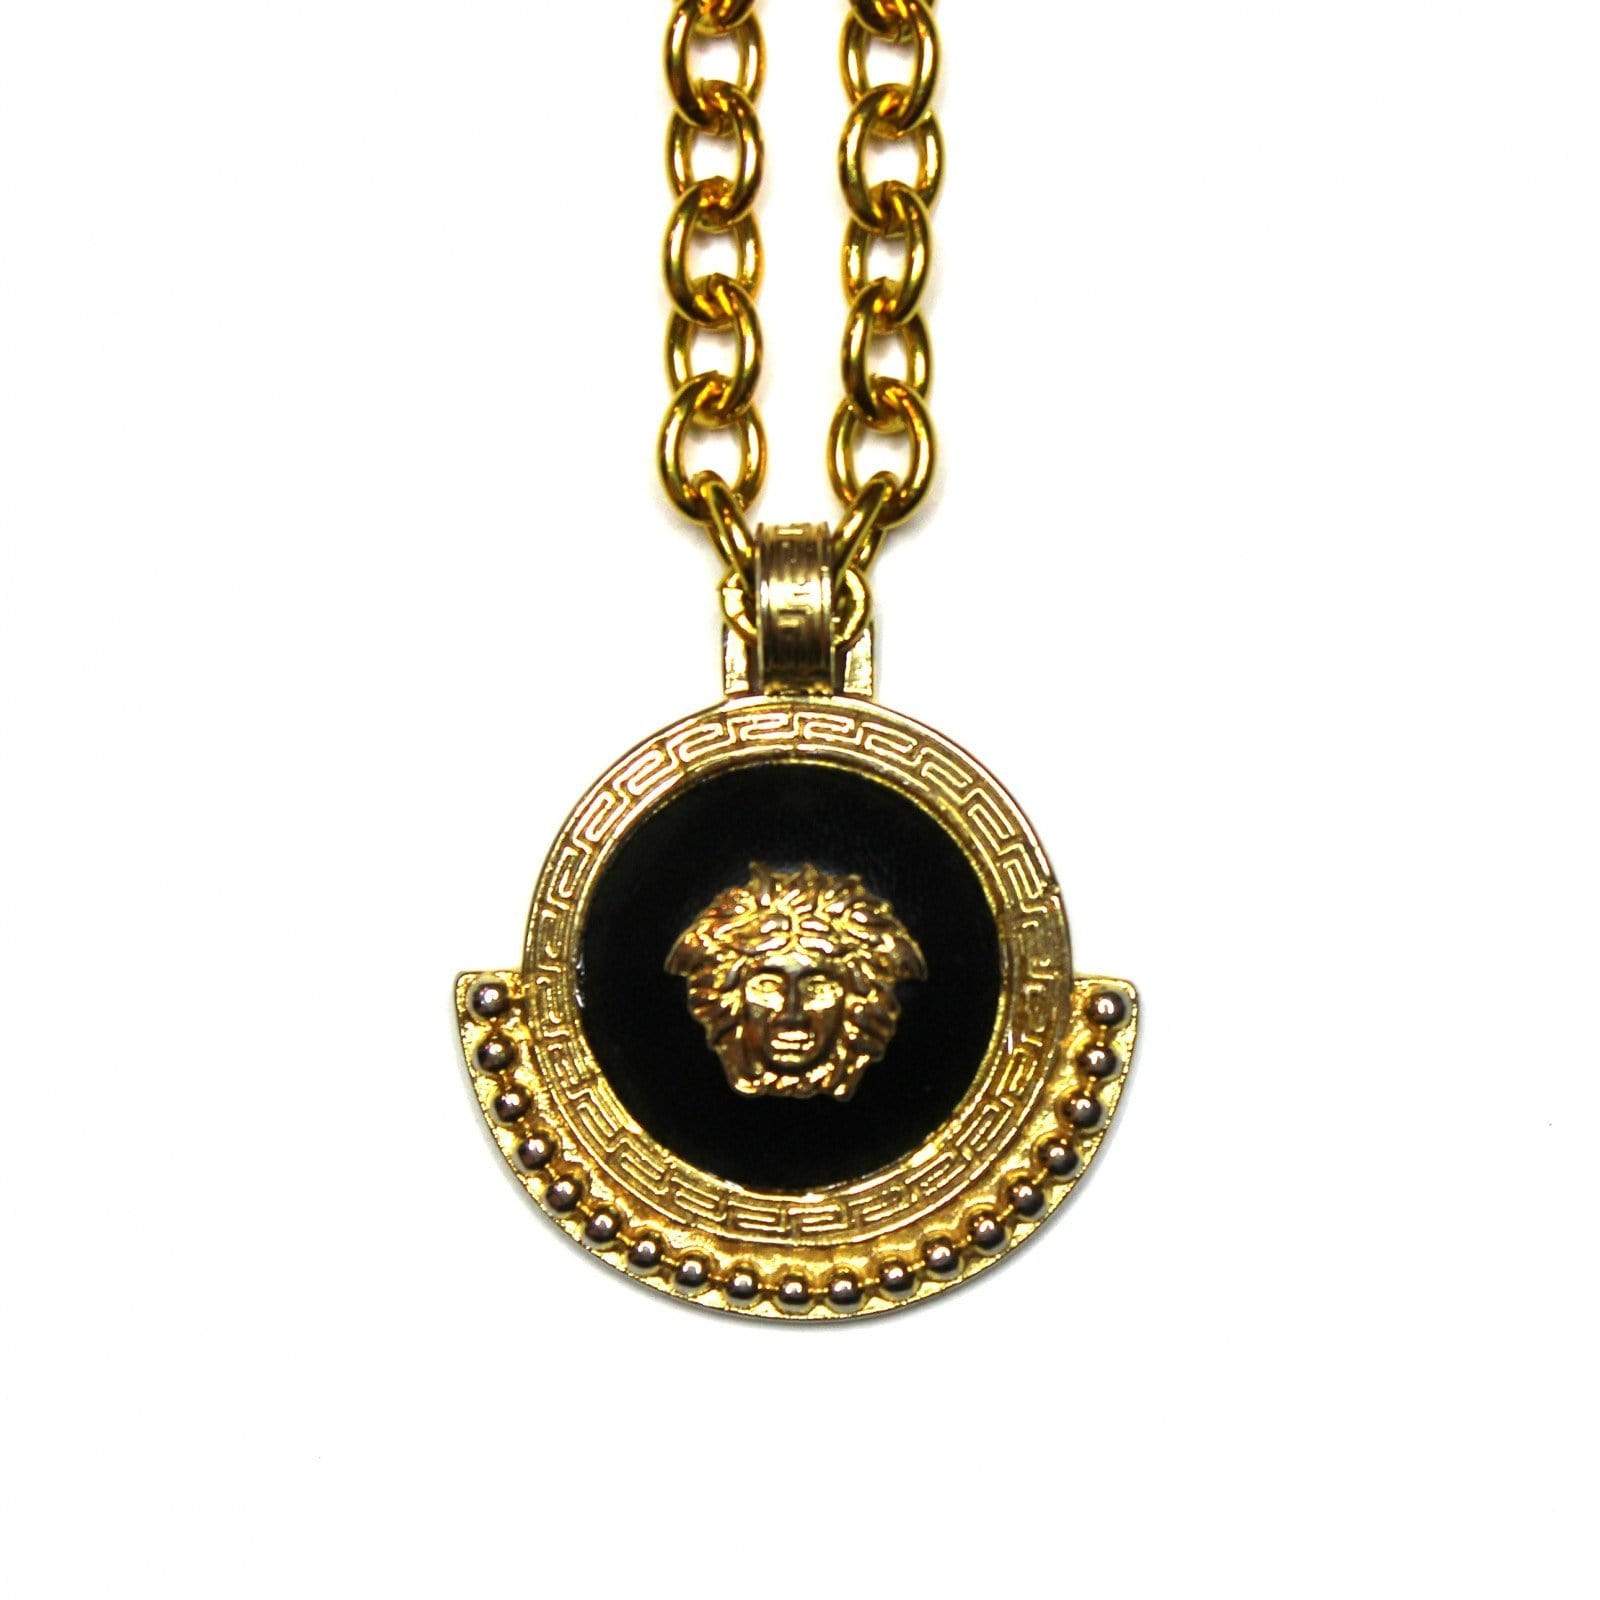 Gold Gianni Versace Medusa Head Pendent Chain with Black Leather Accent RSTKD Vintage